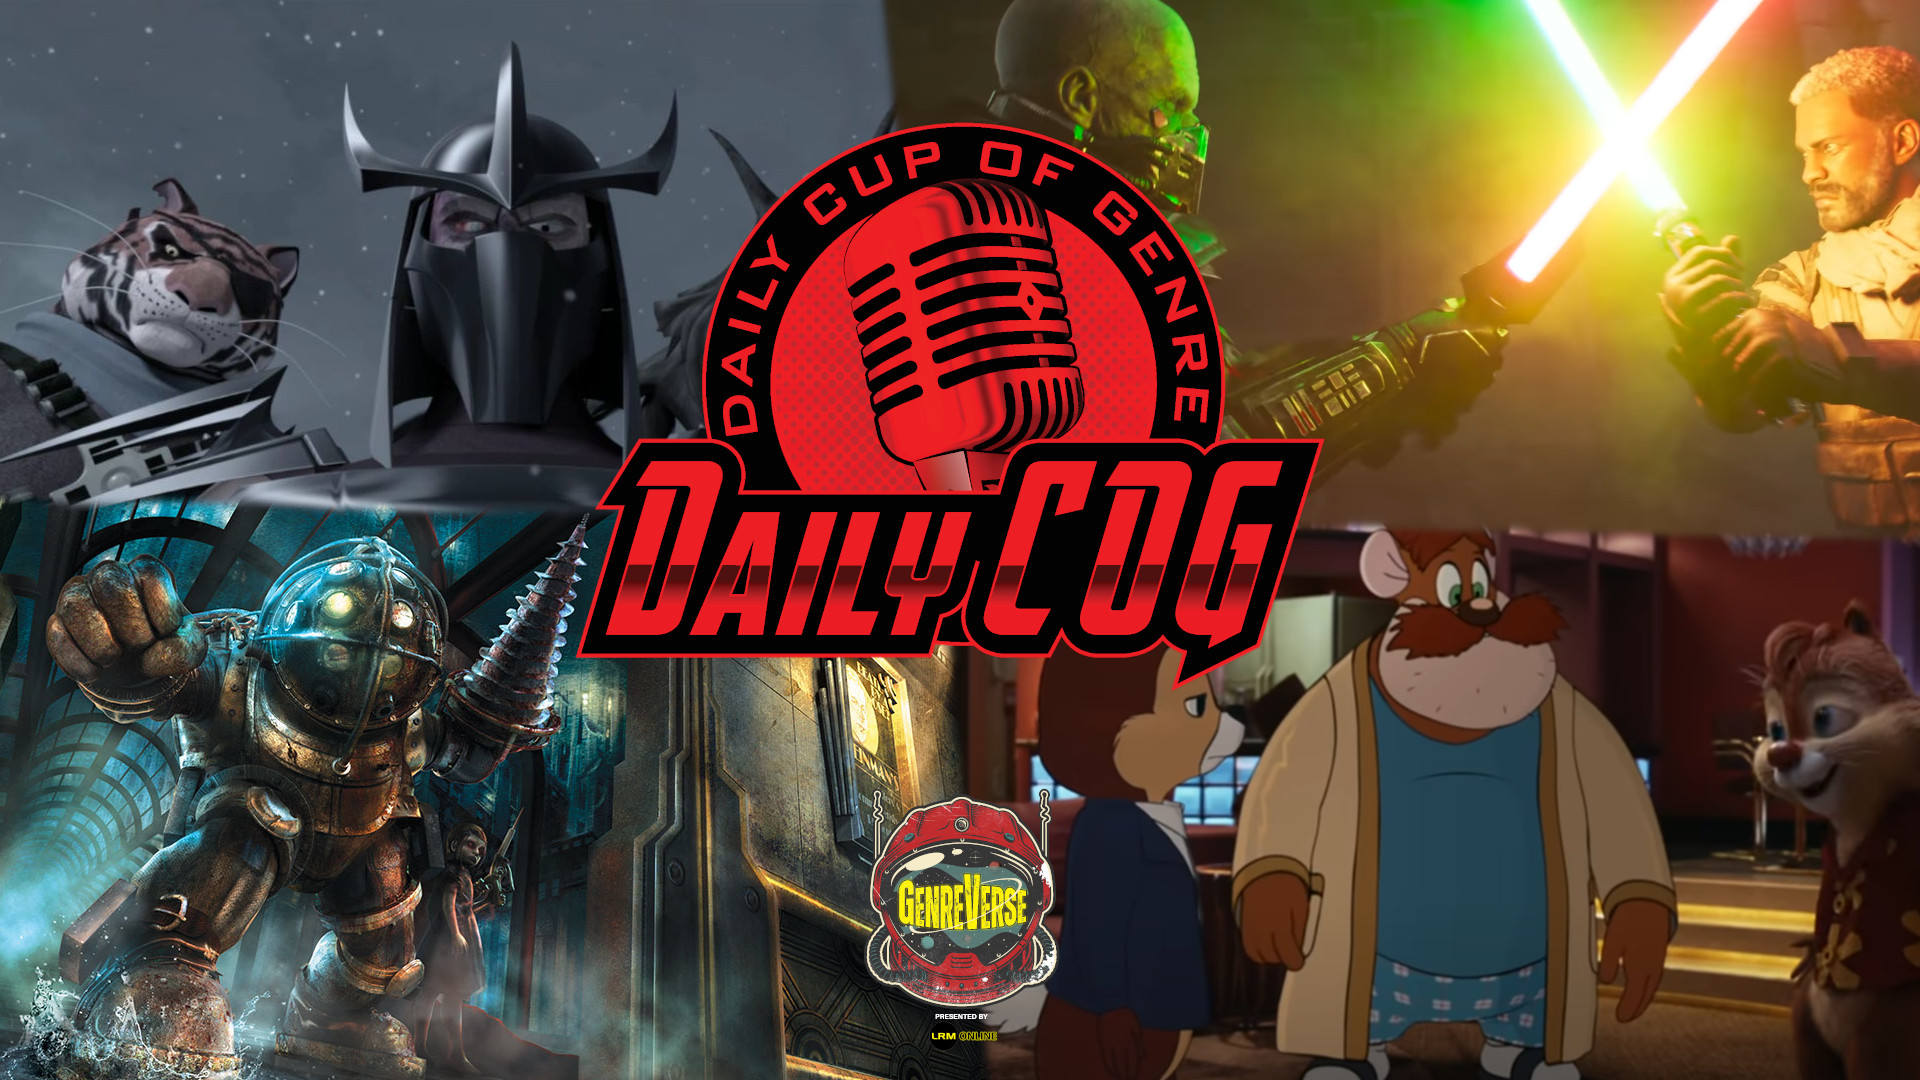 Rescue Rangers Trailer Reaction, The Old Republic Legacy Of The Sith Cinematic Reaction, TMNT Villians Spinoffs, Bishock Movie From Netflix Daily COG